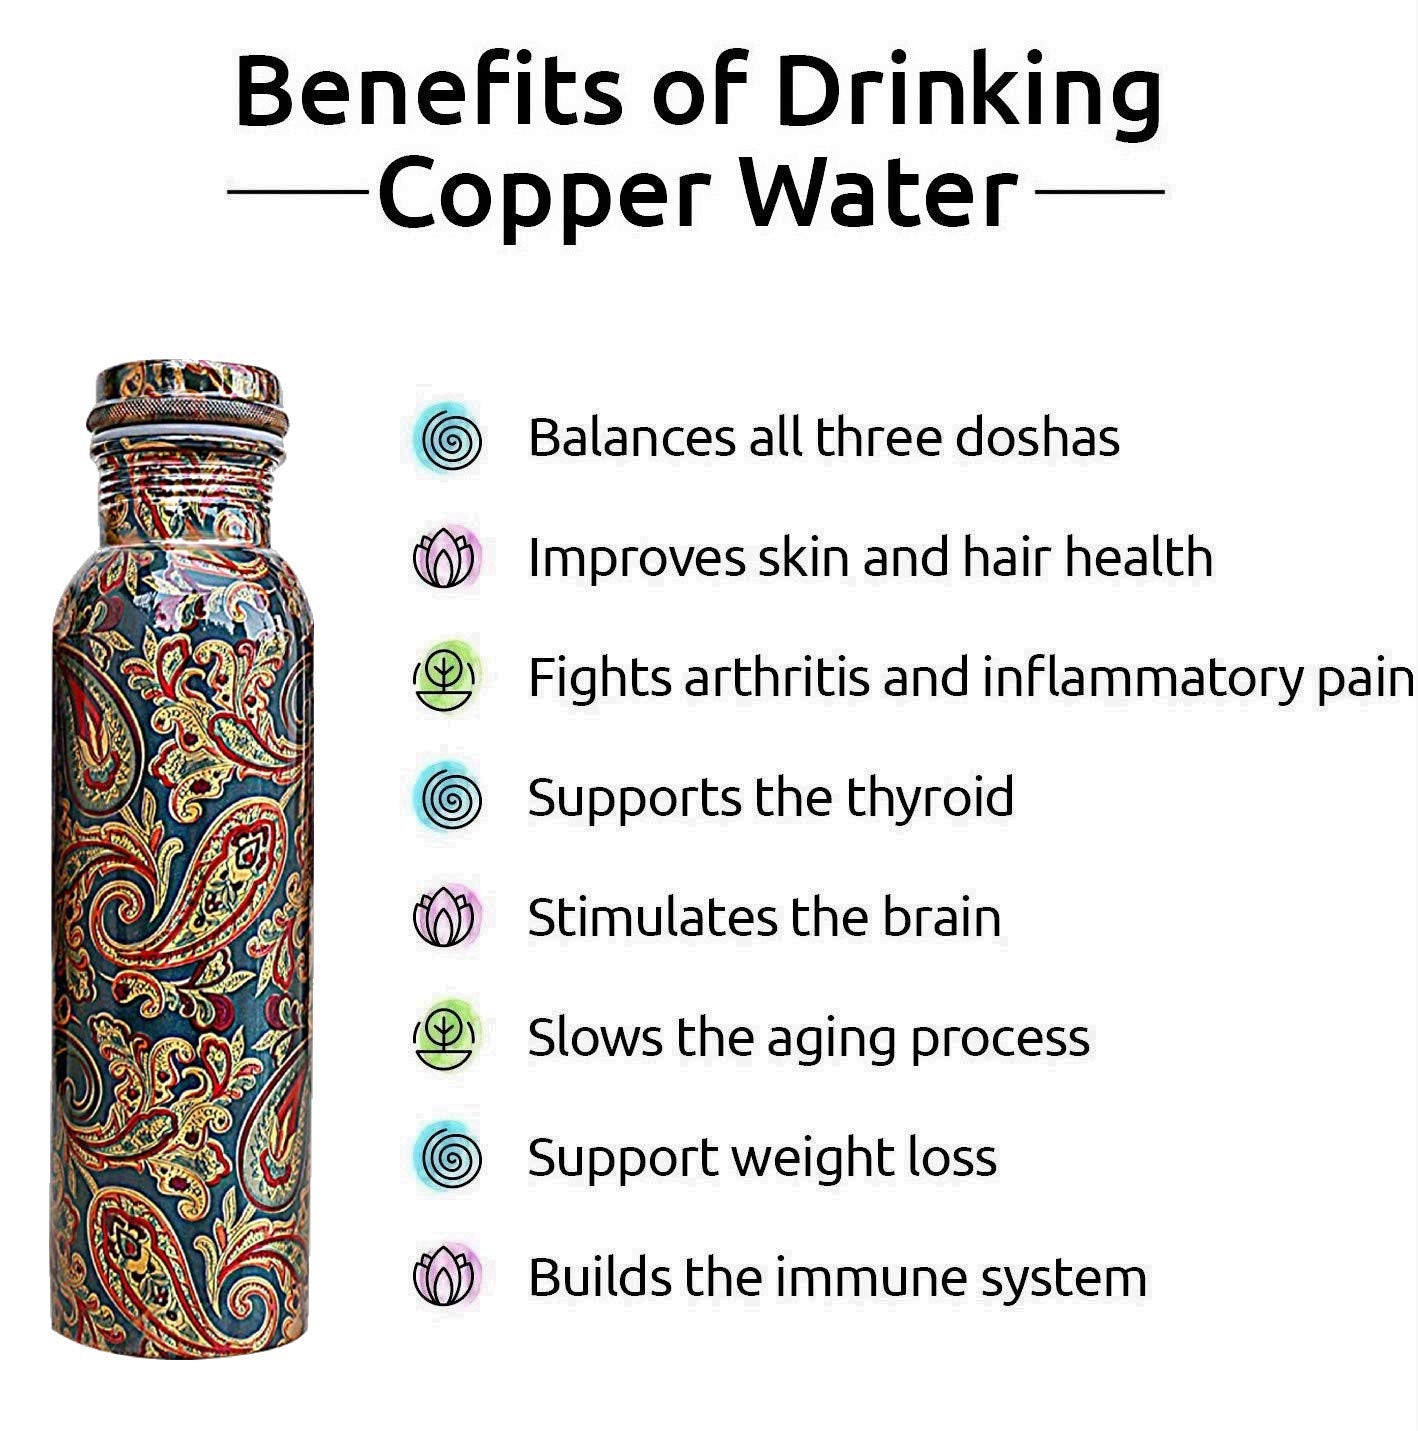 Benefits of drinking copper water